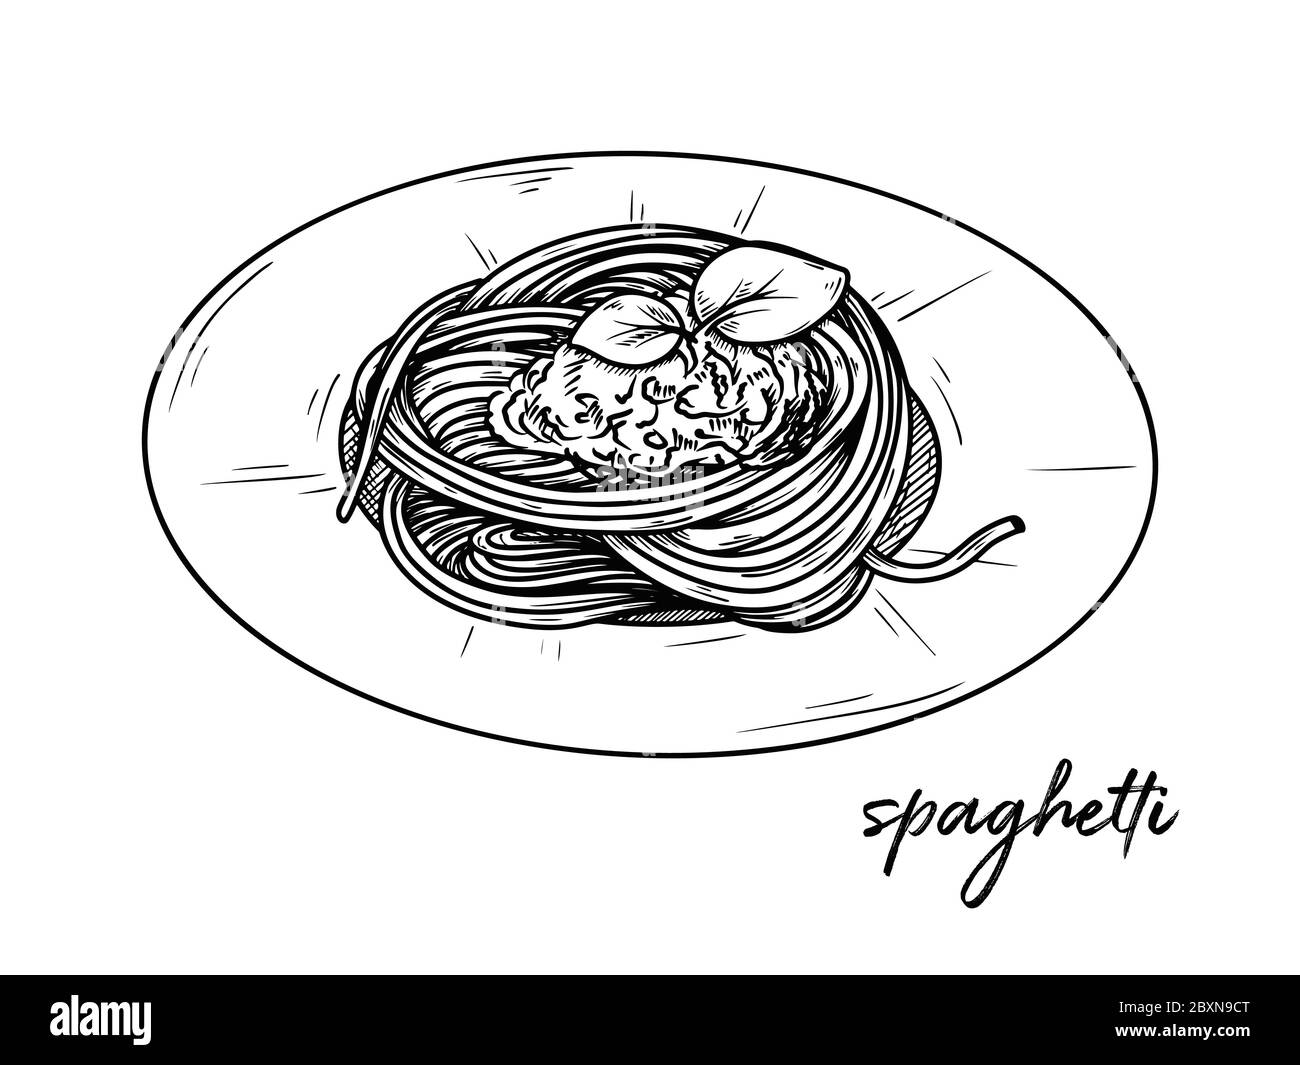 Spaghetti isolated on a white background. Sketch Italian dishes. Vector illustration in sketch style. Stock Vector